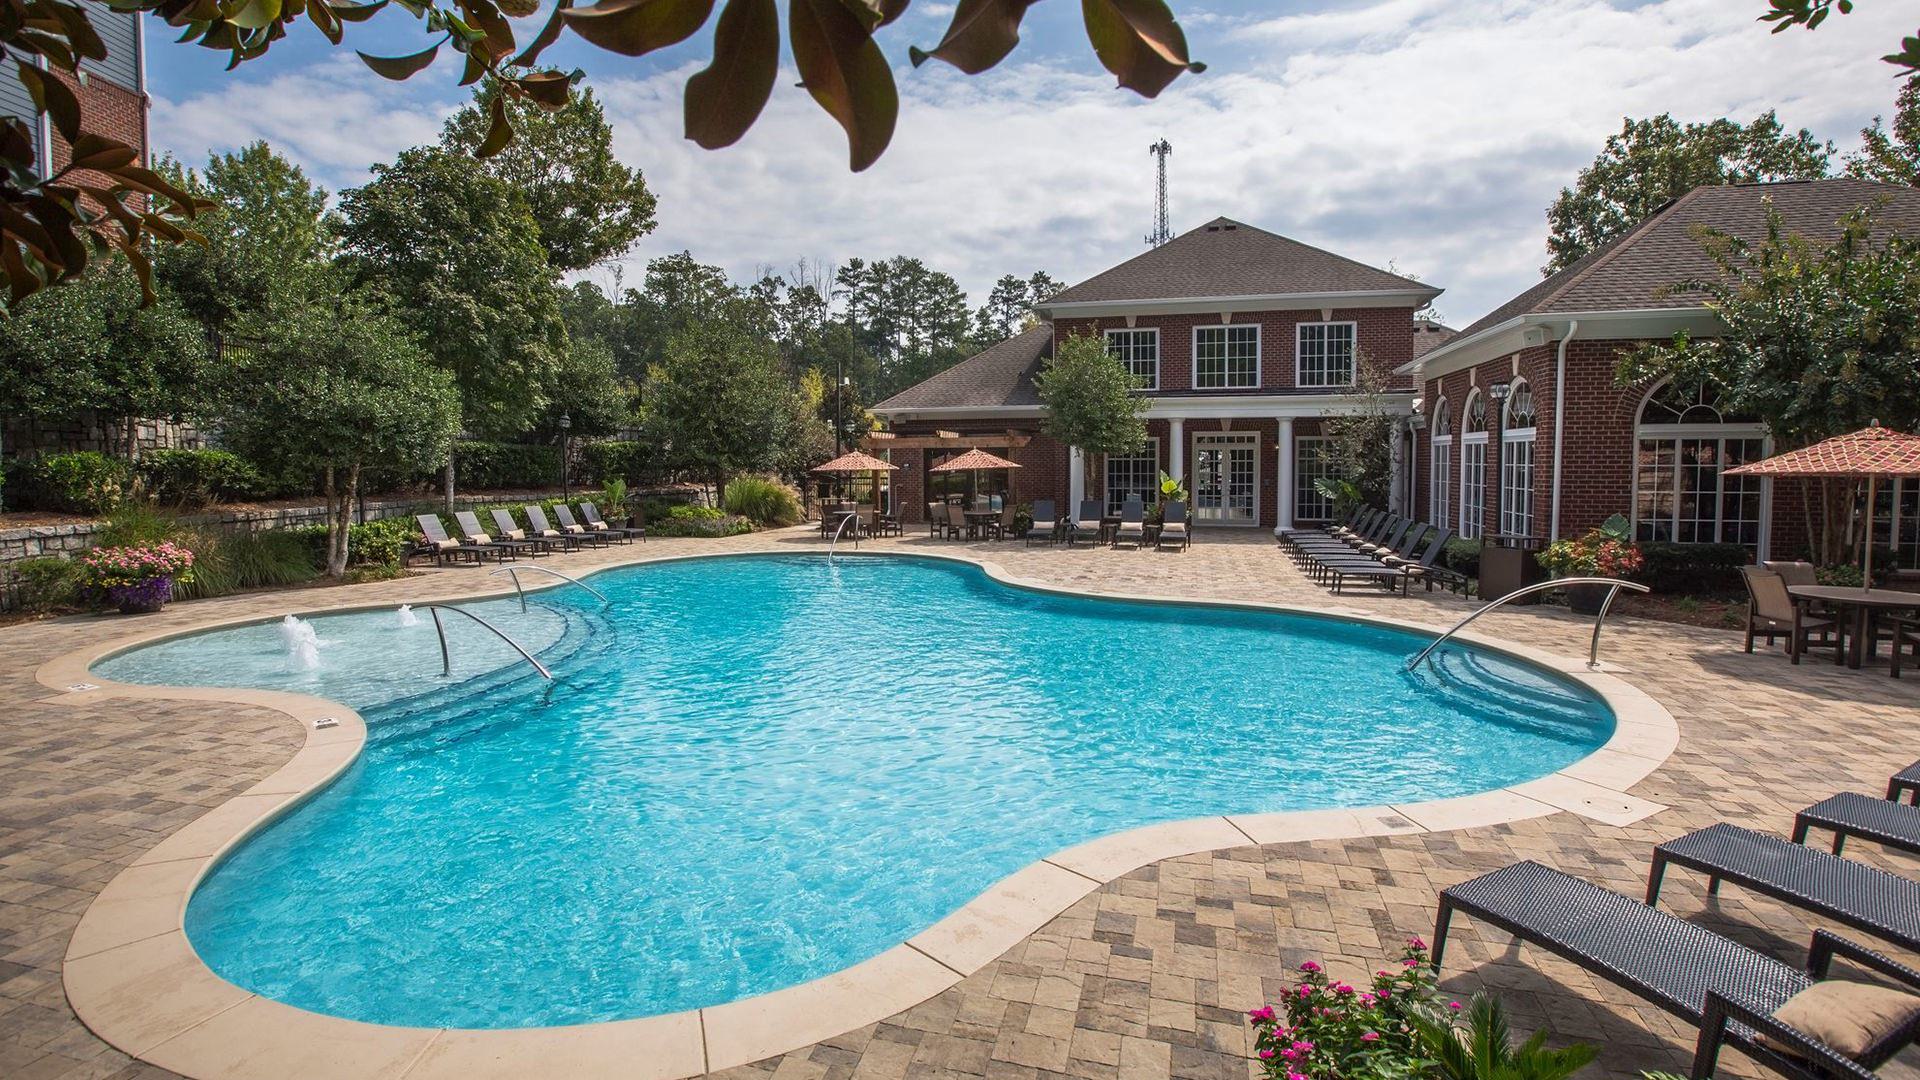 Saltwater Pool and Lounge Chairs at Our Lawrenceville, GA Apartments